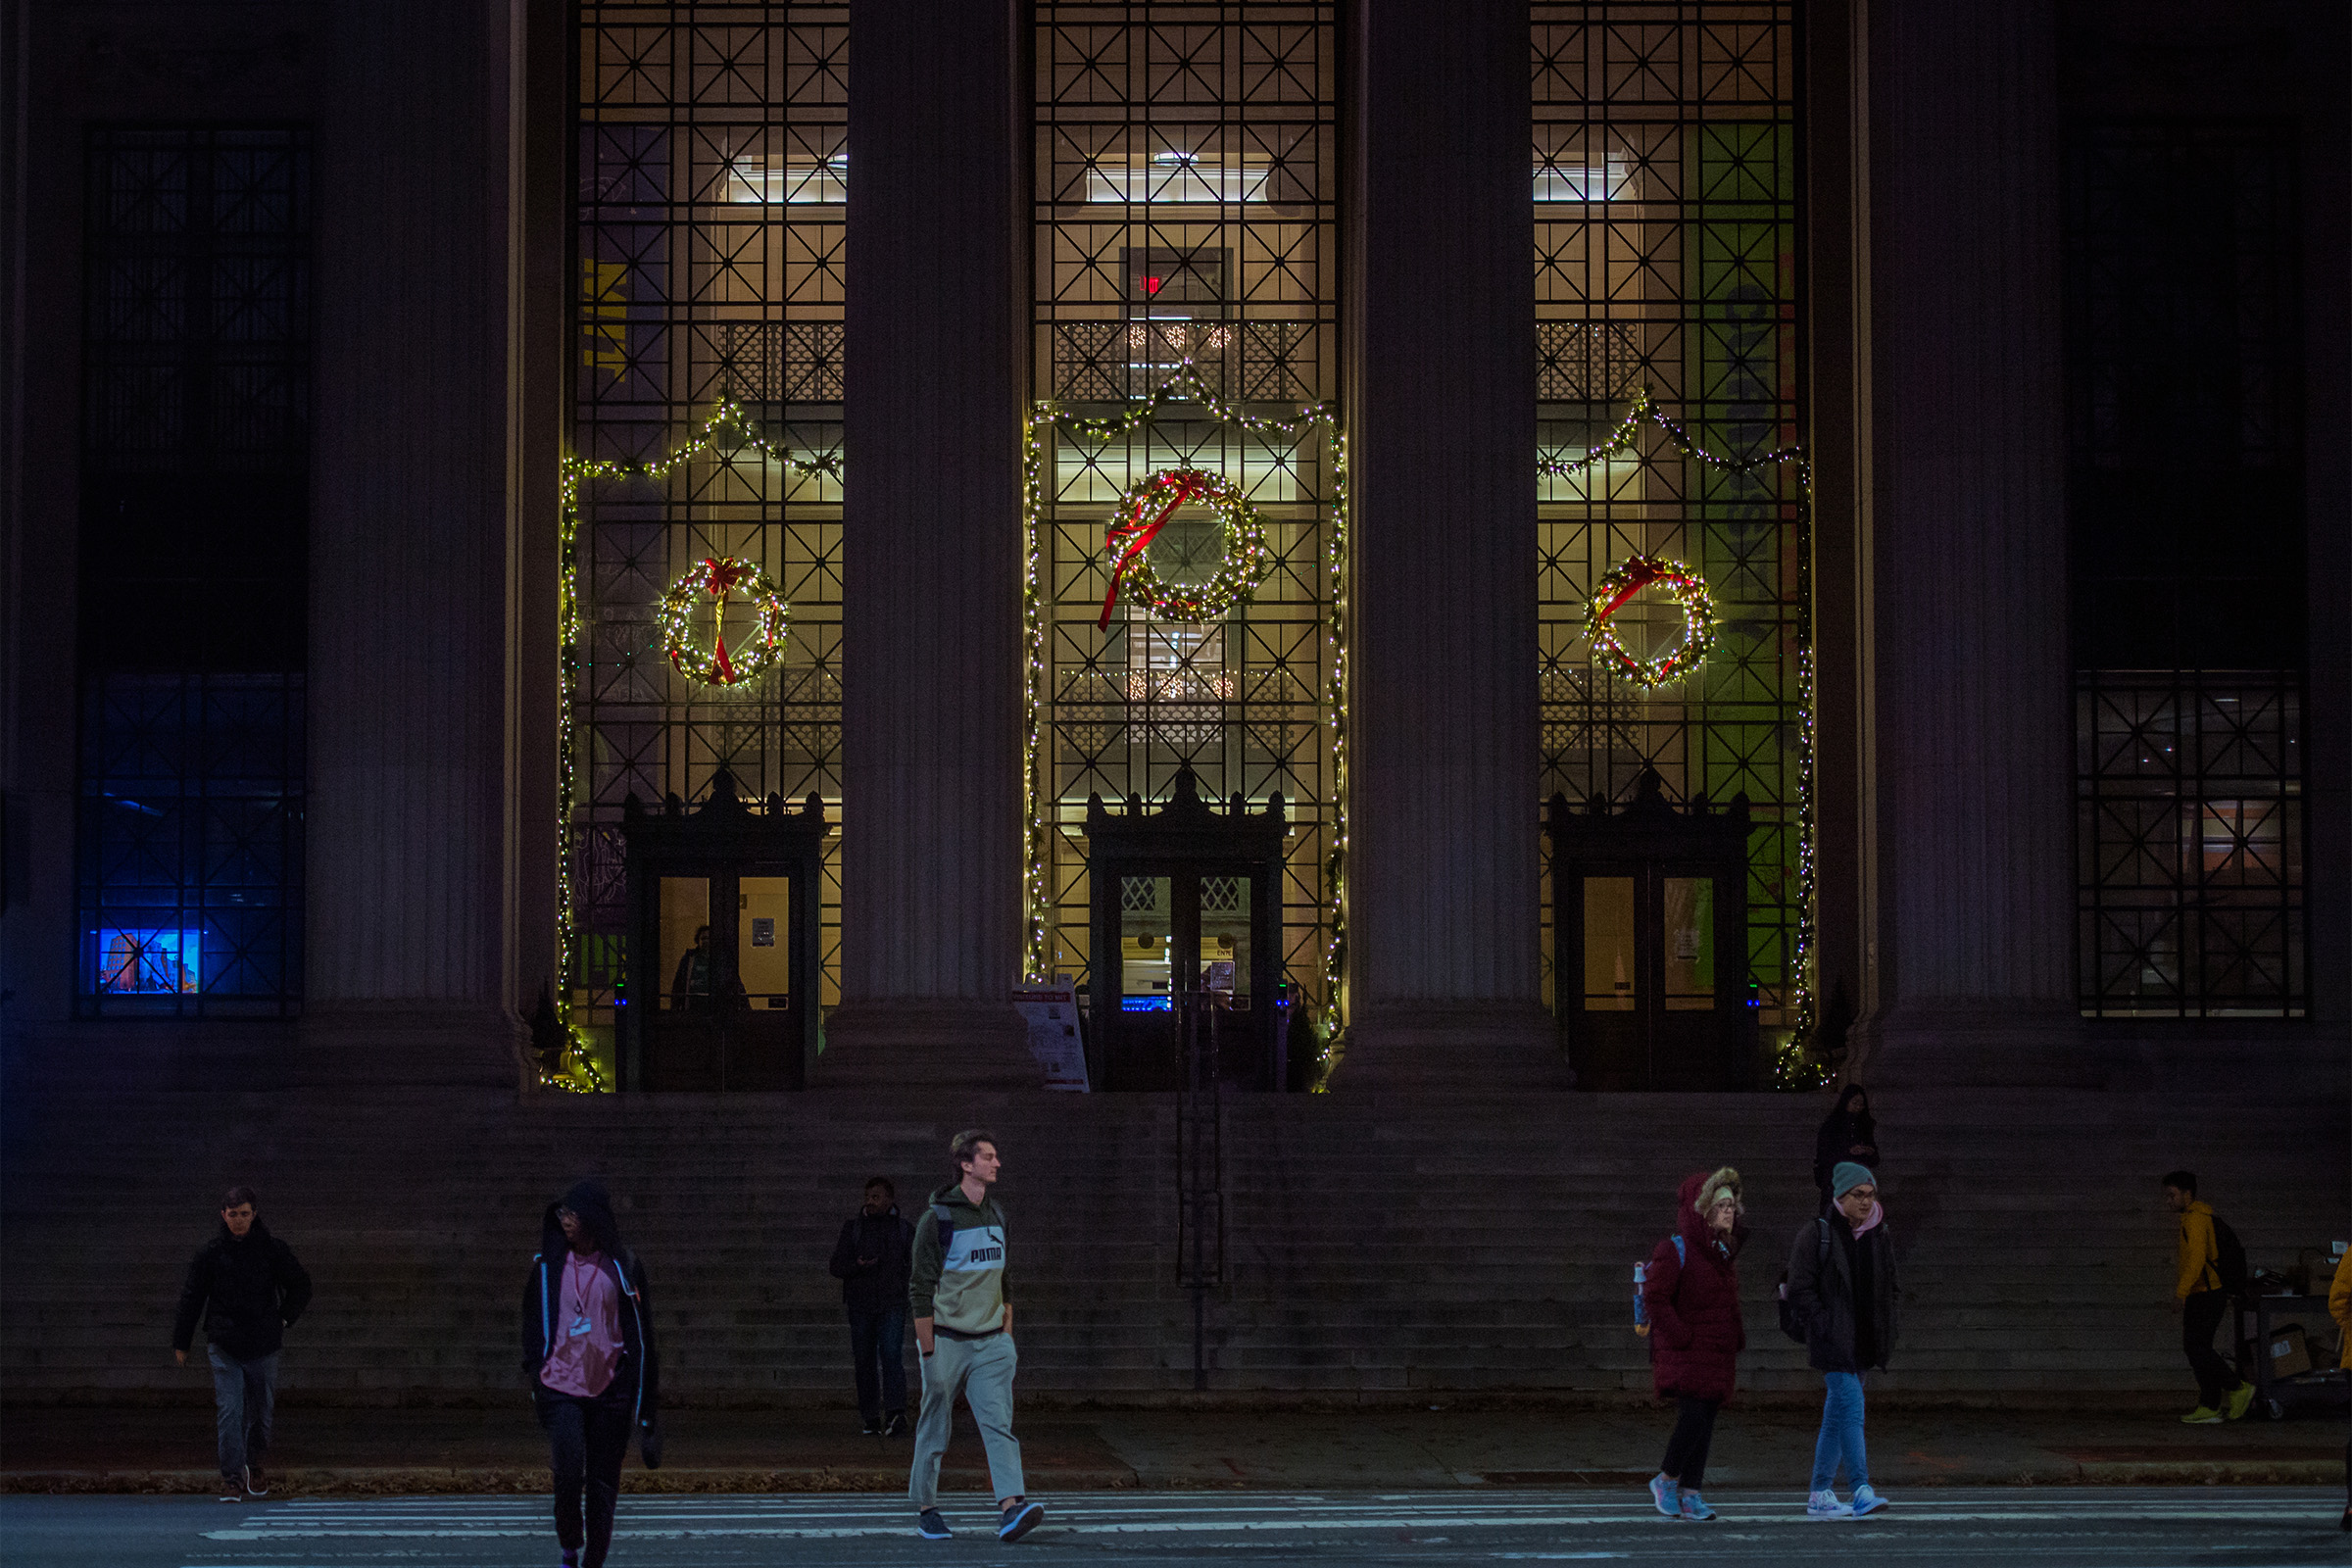 MIT’s departments, labs, and centers celebrate the holidays